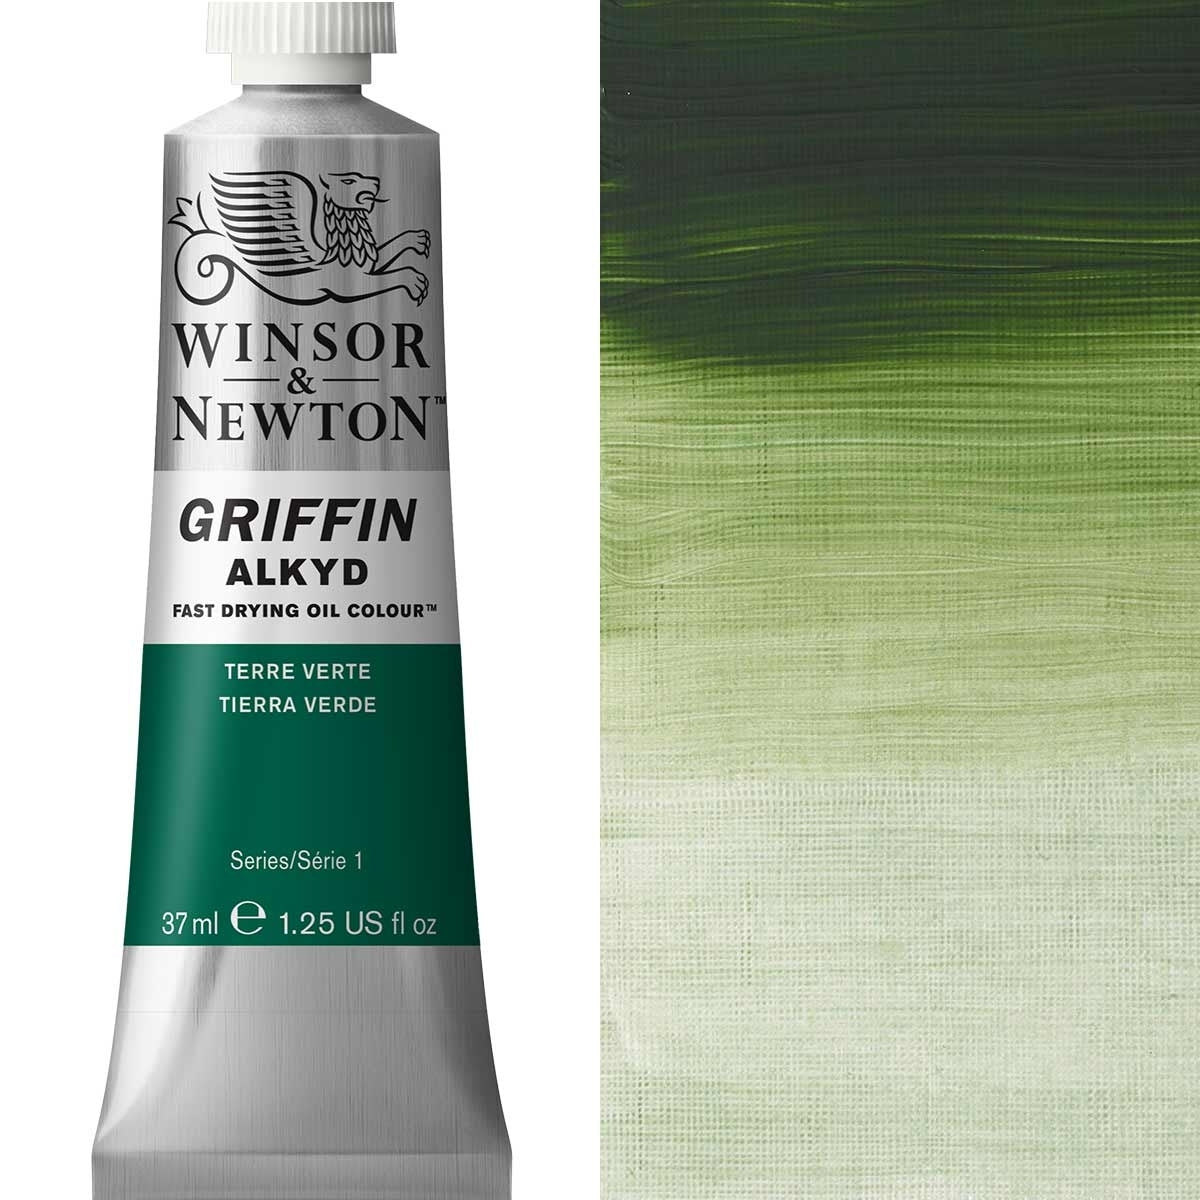 Winsor and Newton - Griffin ALKYD Oil Colour - 37ml - Terre Verte